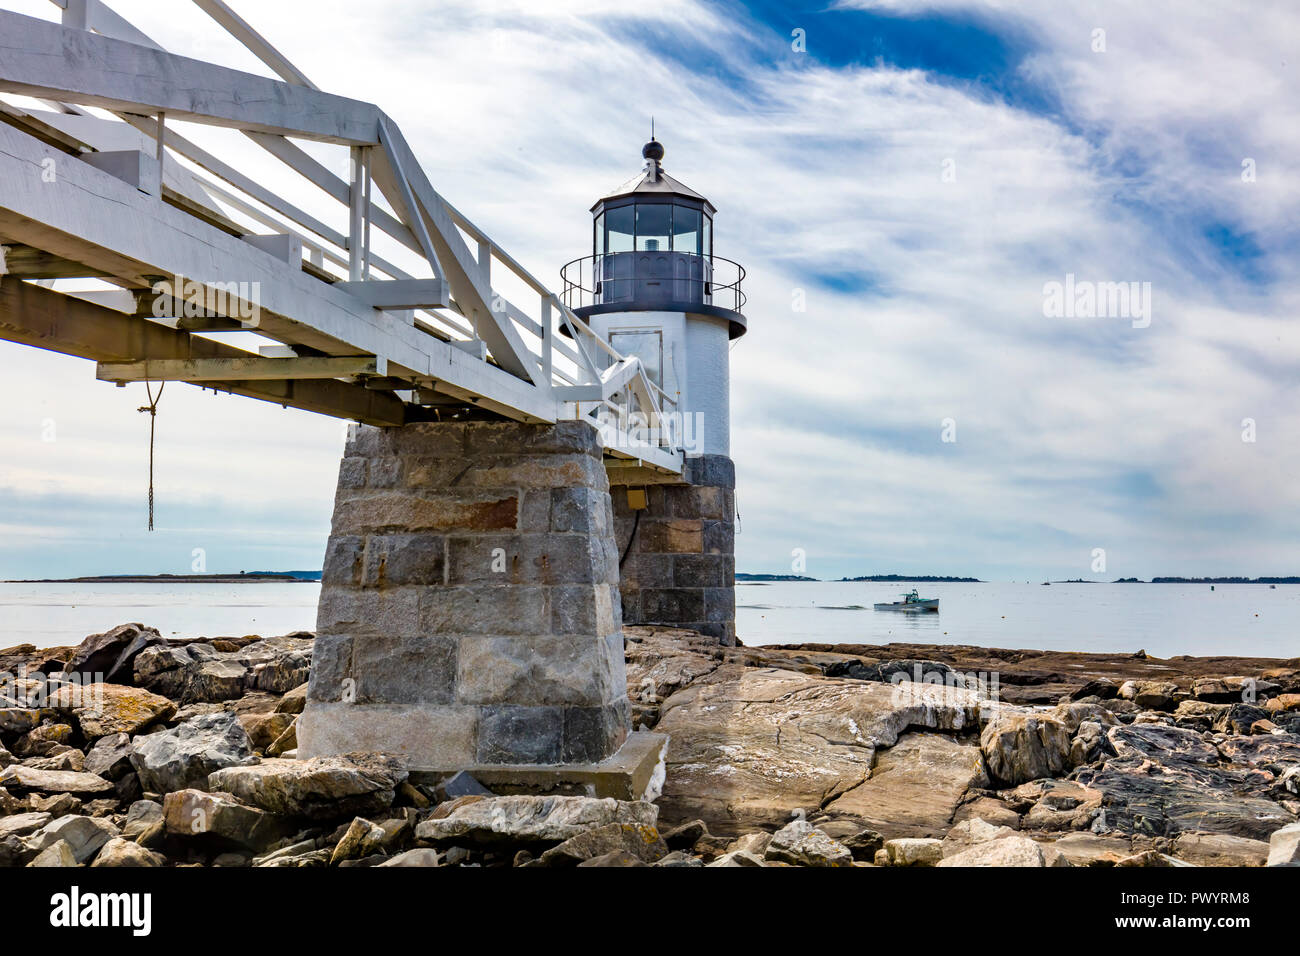 Marshall Point Light Station gebaut 1857 in Port Clyde Maine Stockfoto